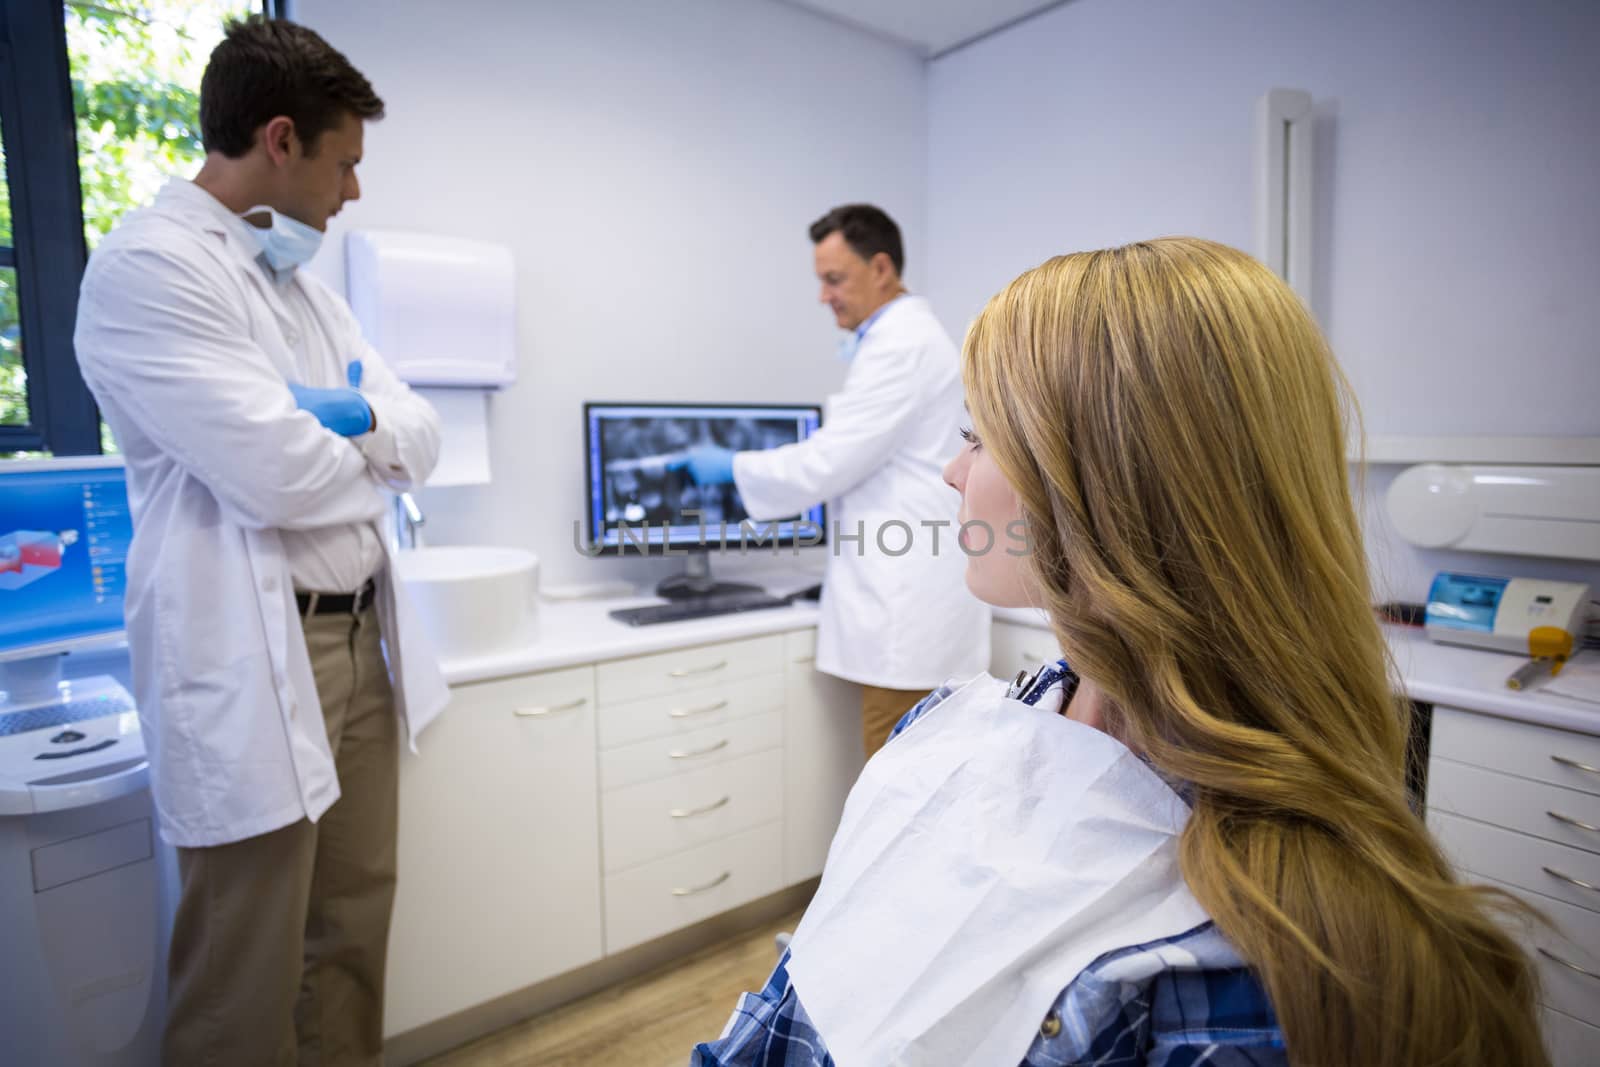 Dentist discussing teeth x-ray with his colleague and patient by Wavebreakmedia